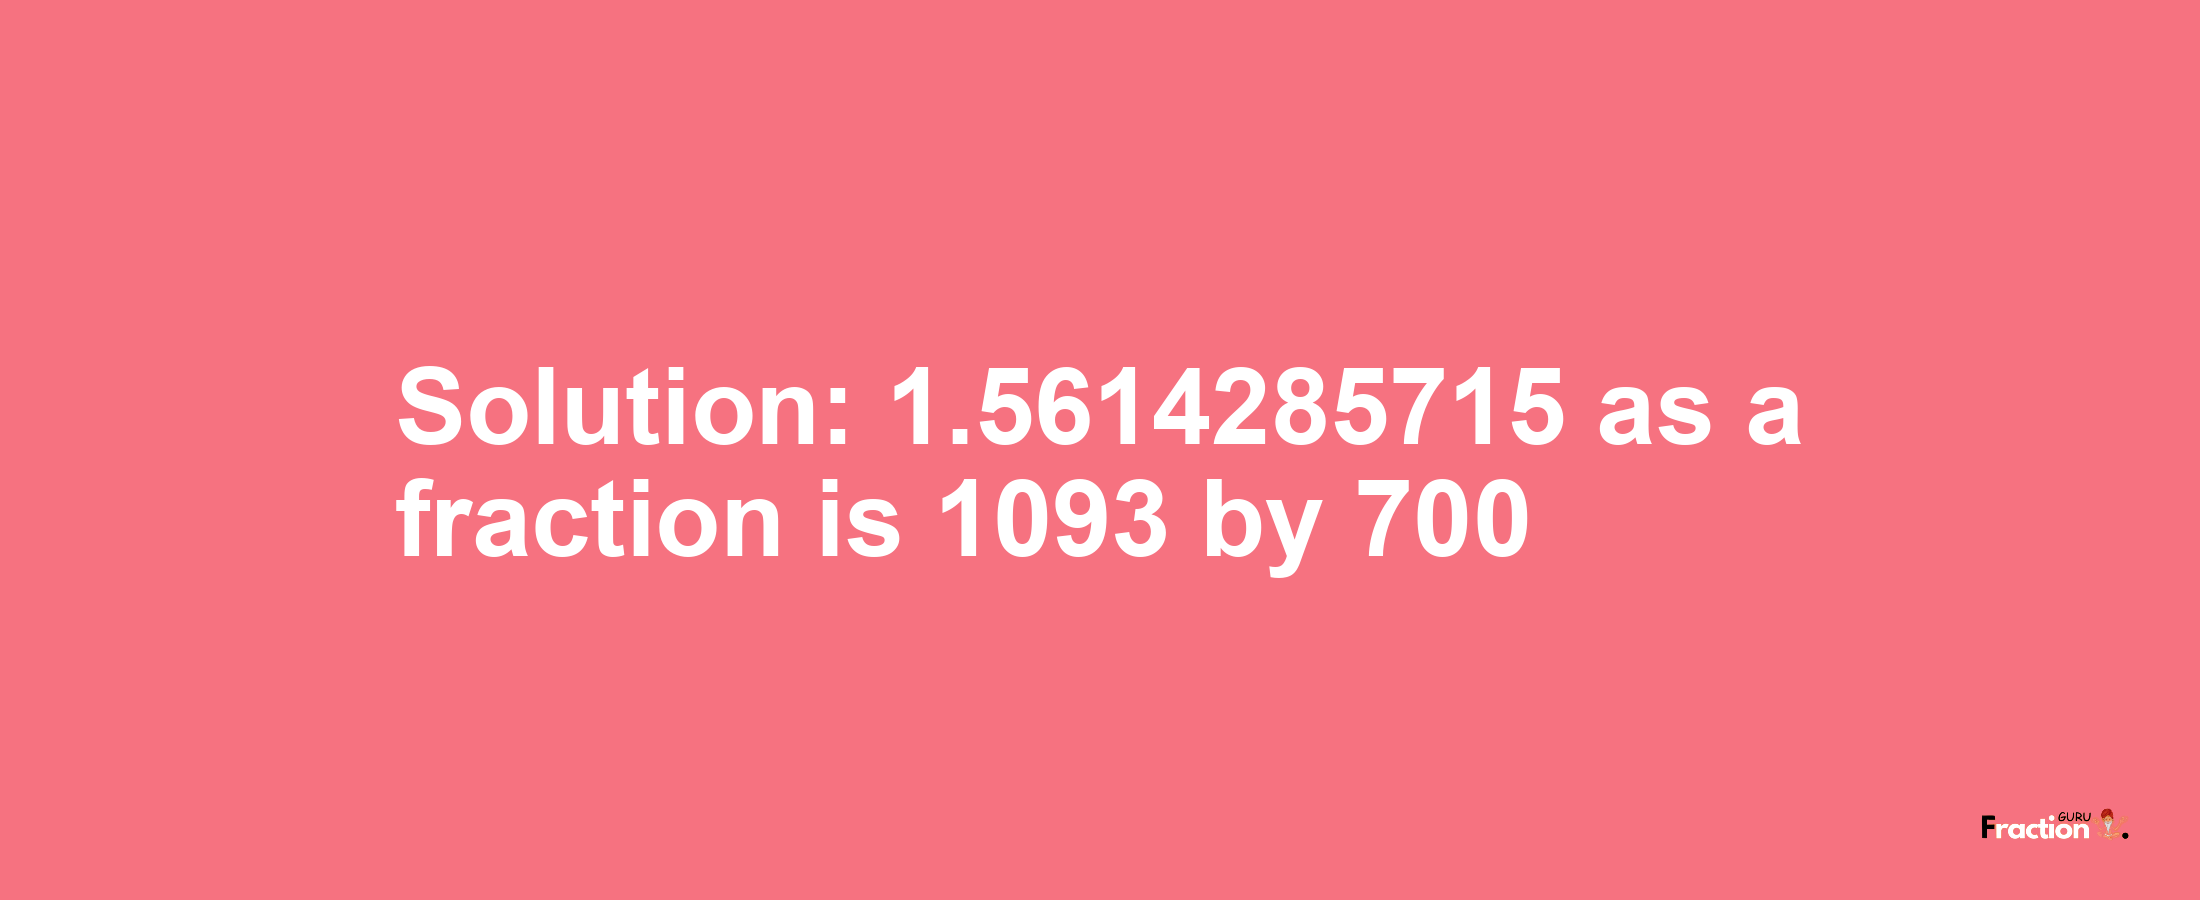 Solution:1.5614285715 as a fraction is 1093/700